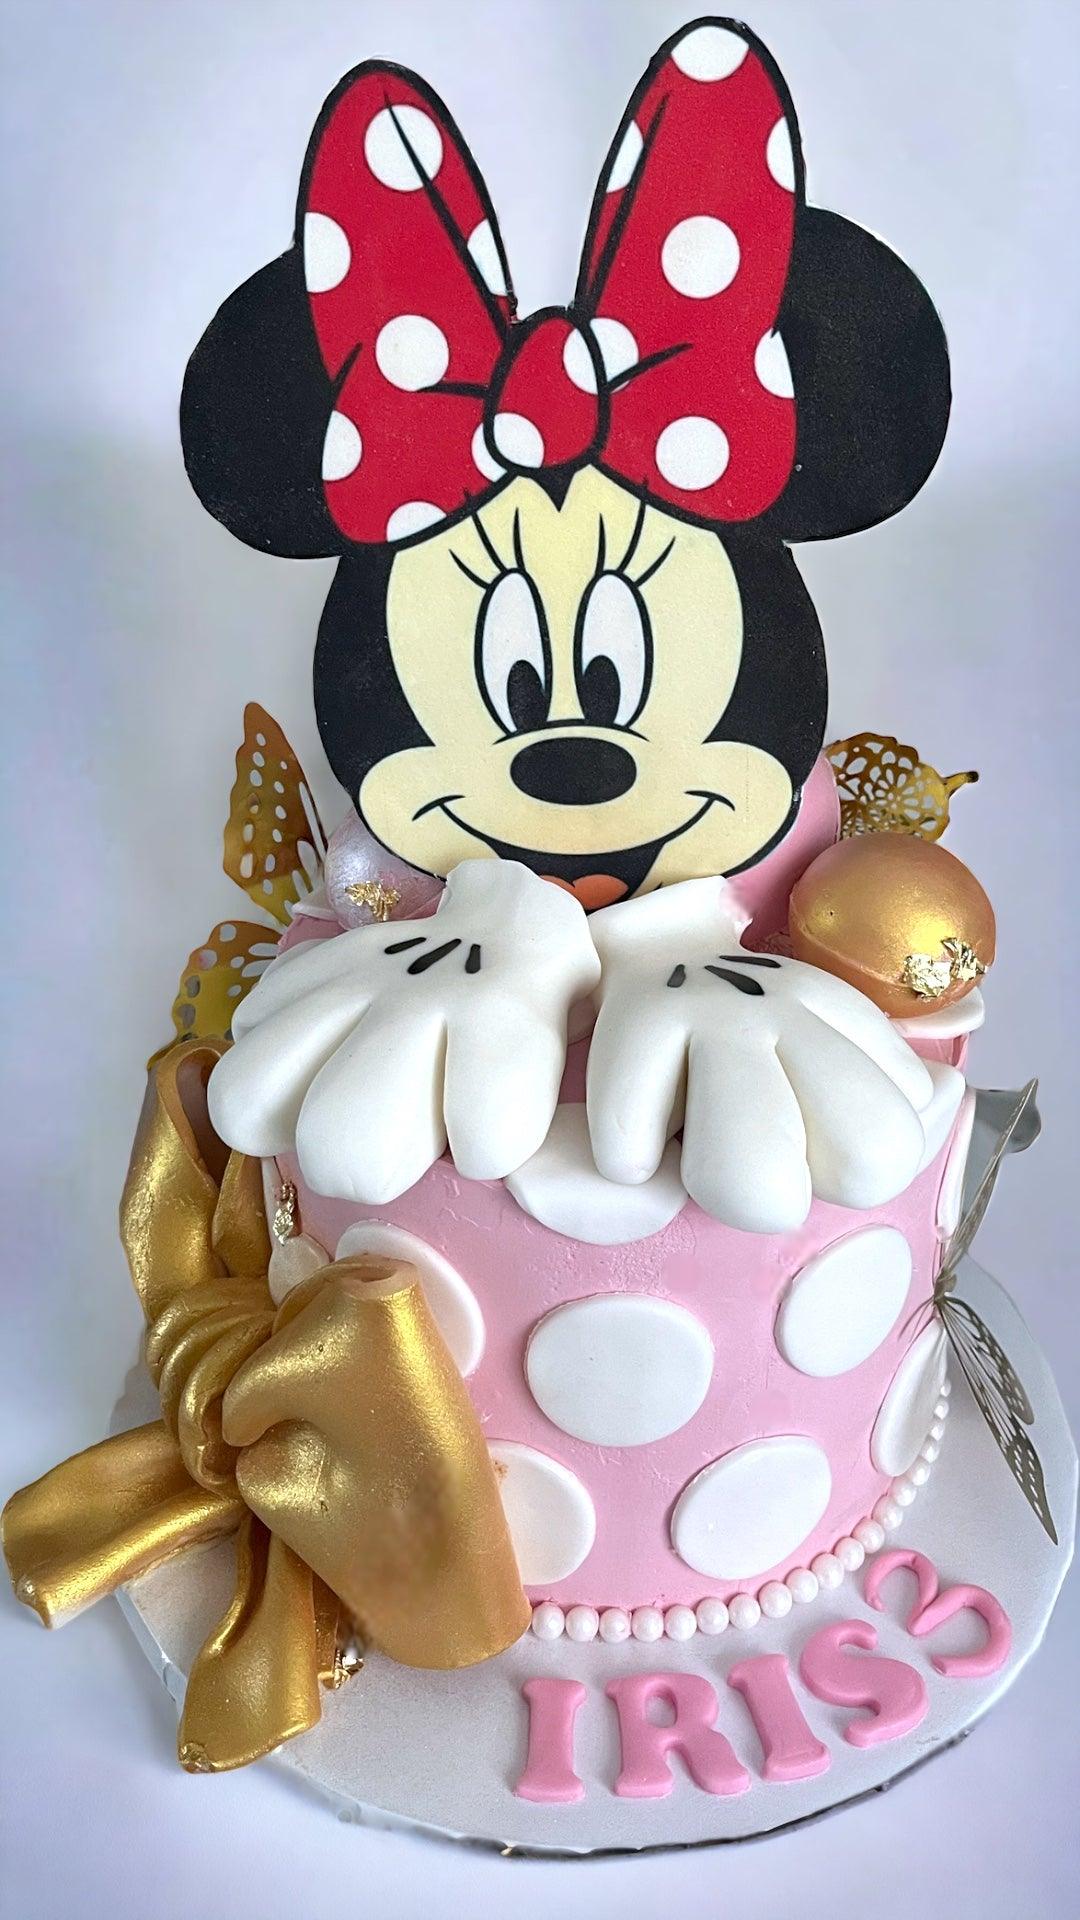 Minnie Mouse birthday cake - Naturally_deliciousss